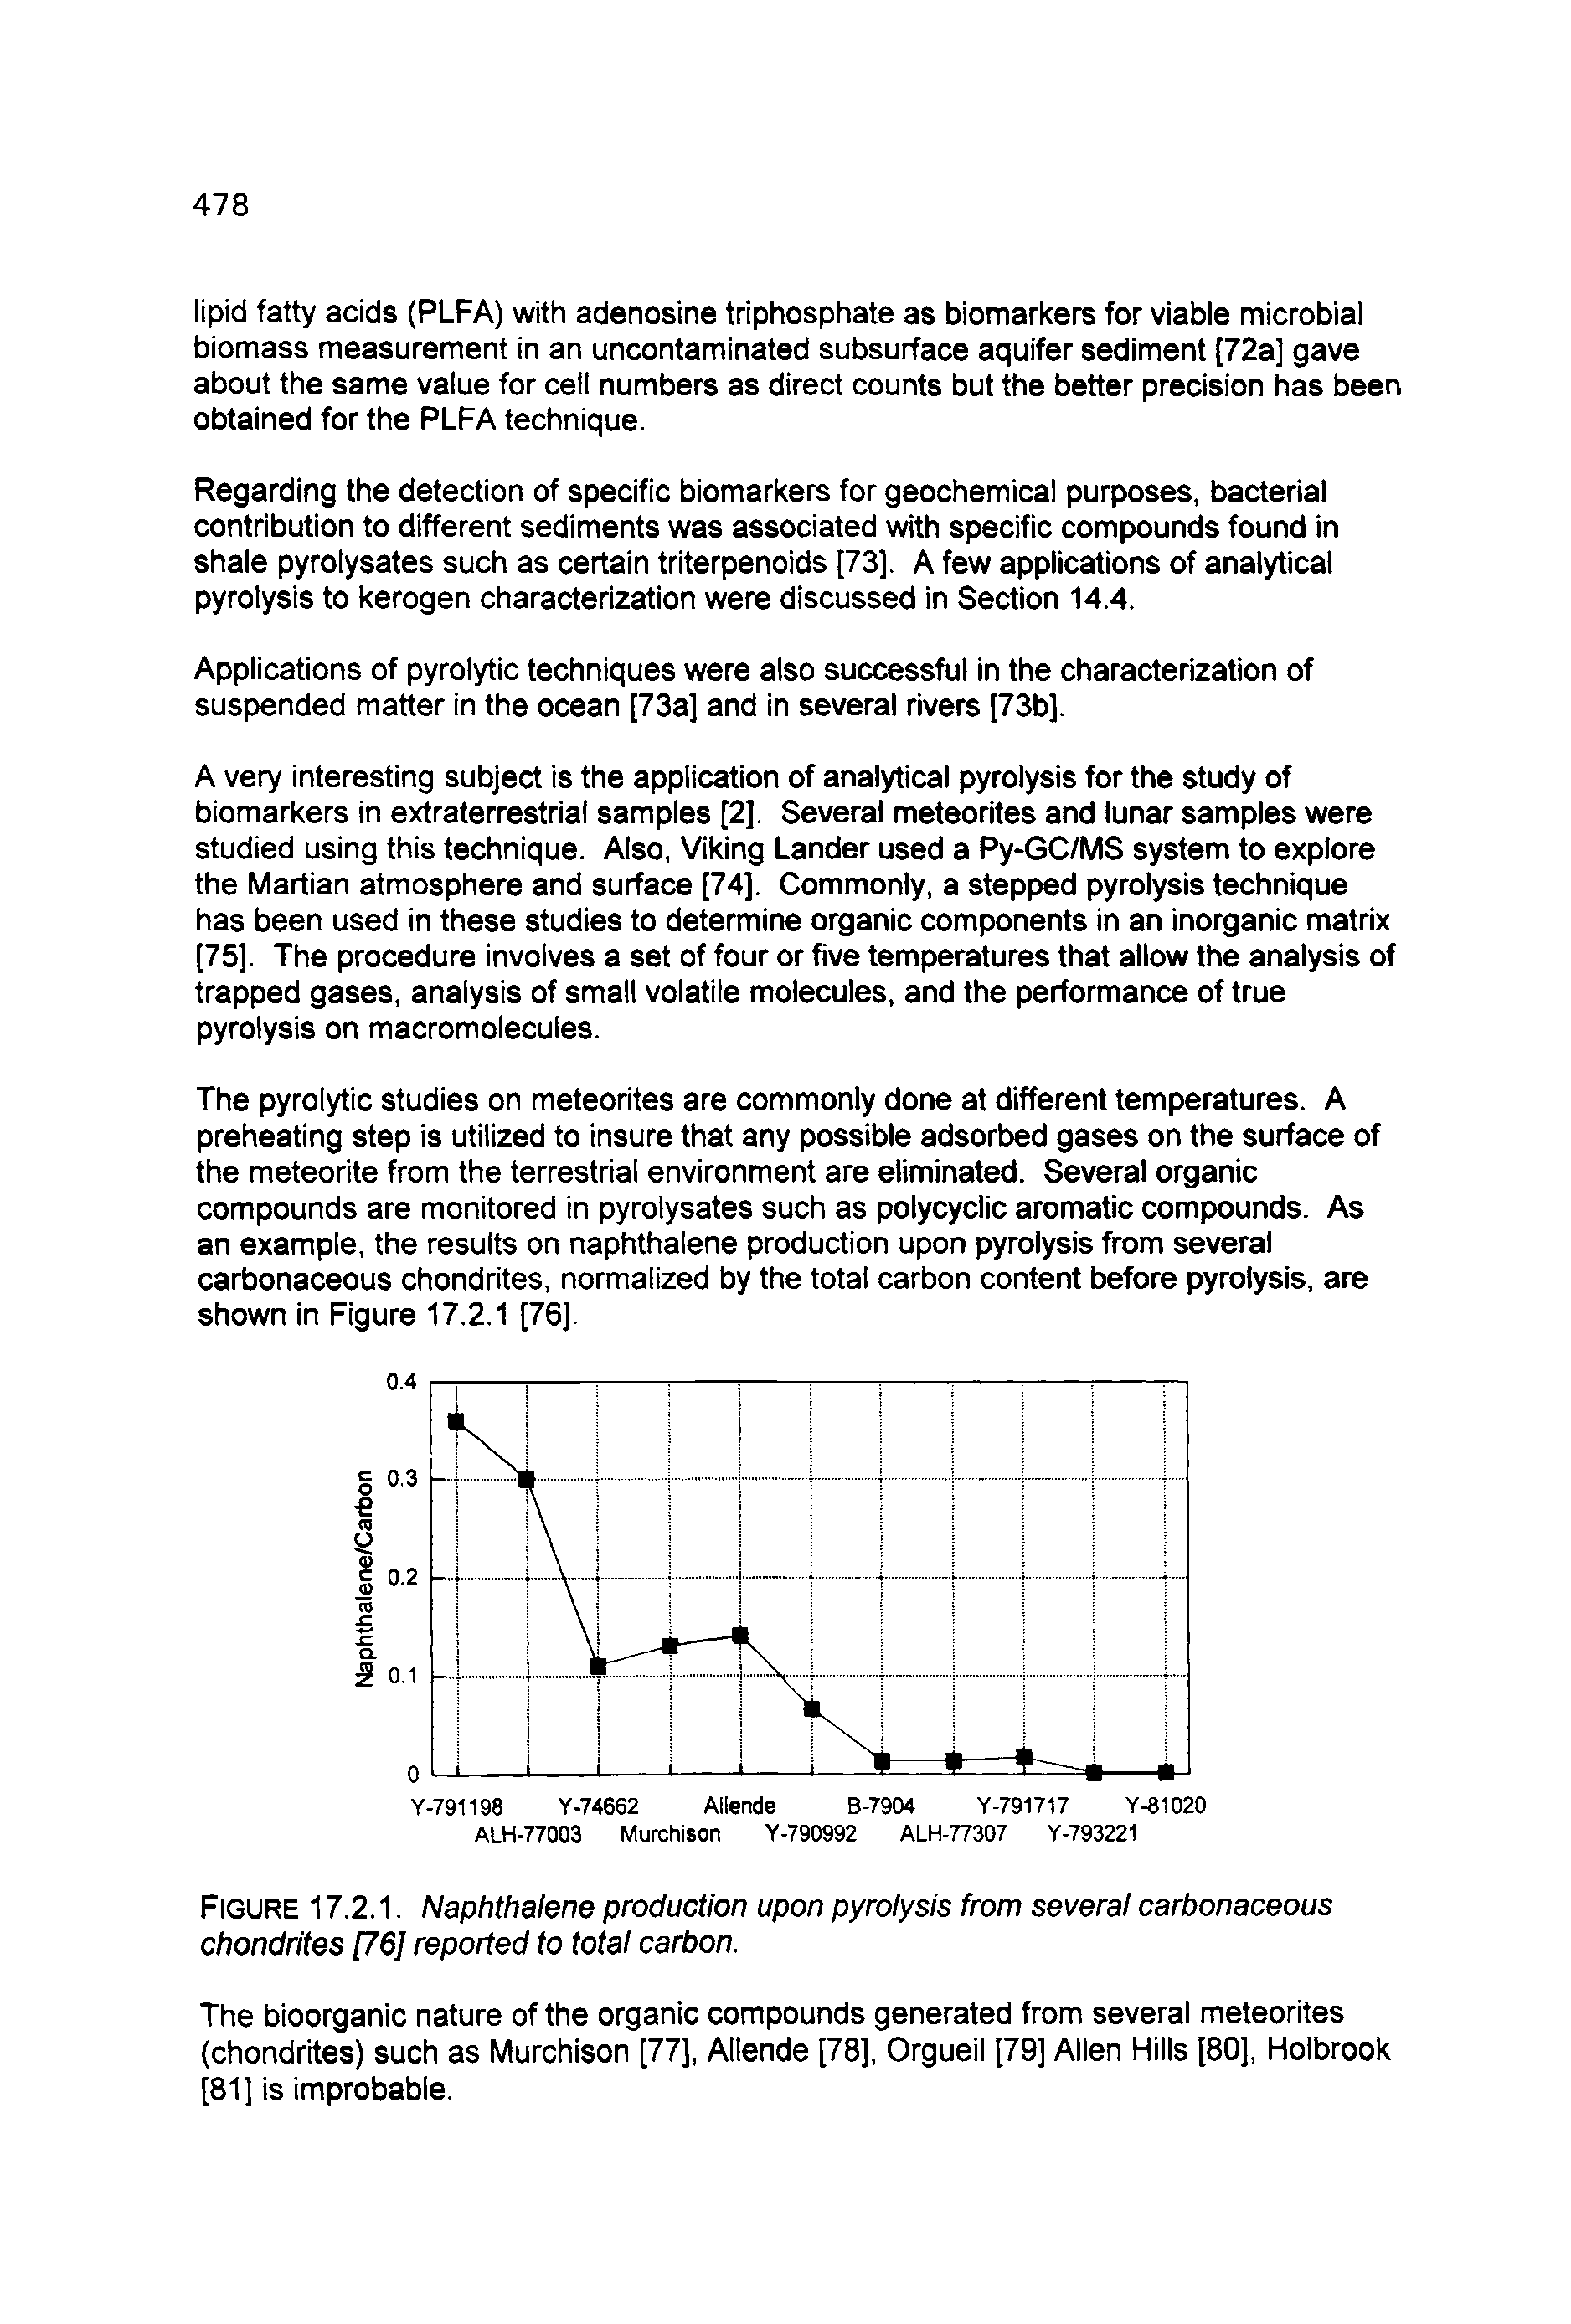 Figure 17.2.1. Naphthalene production upon pyrolysis from several carbonaceous chondrites [76] reported to total carbon.